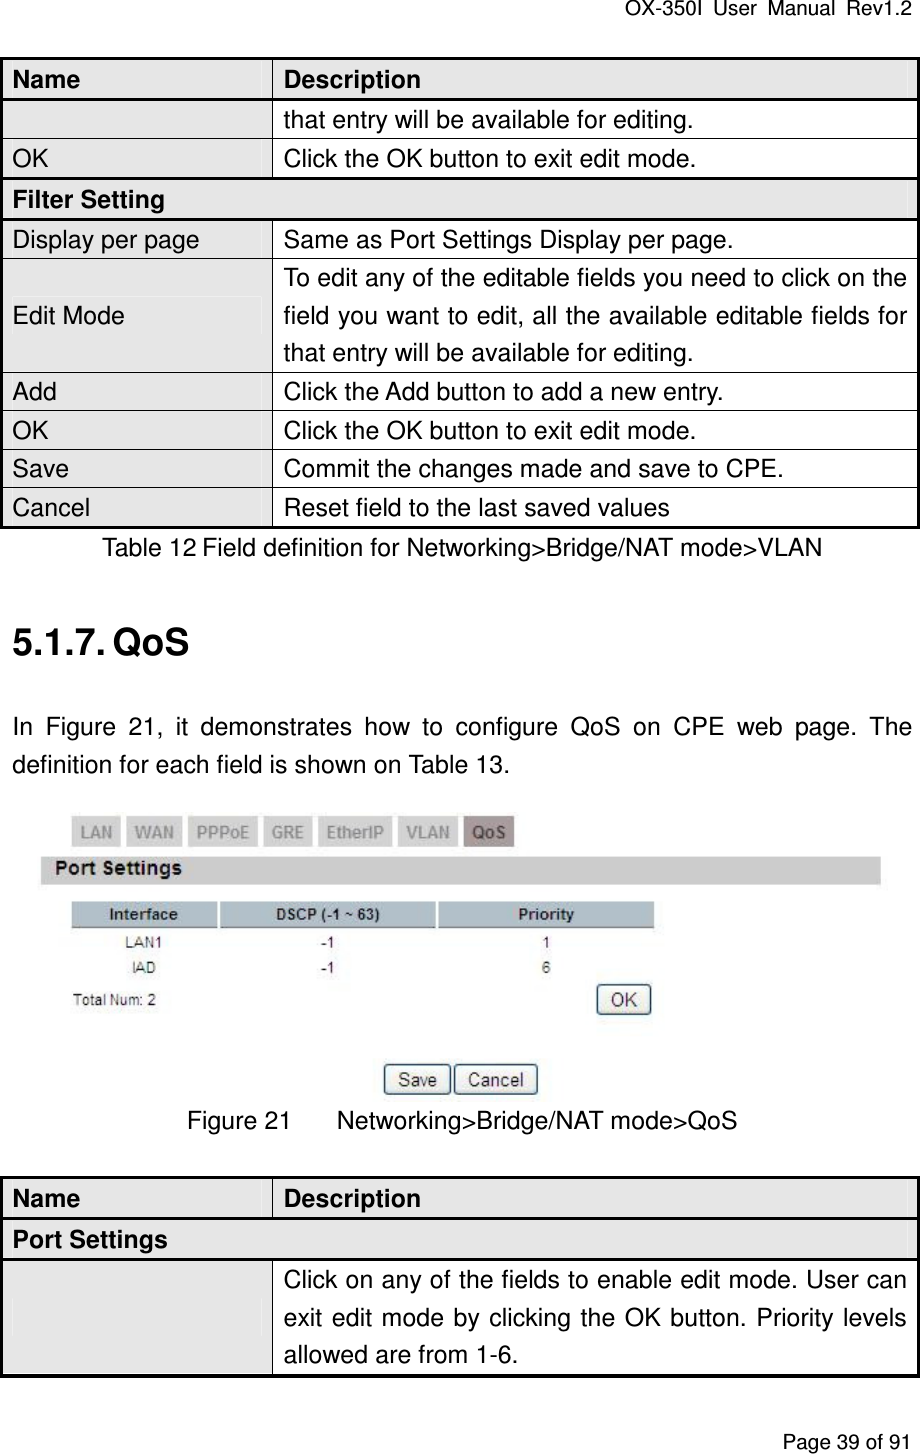 OX-350I  User  Manual  Rev1.2 Page 39 of 91 Name  Description that entry will be available for editing. OK  Click the OK button to exit edit mode. Filter Setting Display per page  Same as Port Settings Display per page. Edit Mode To edit any of the editable fields you need to click on the field you want to edit, all the available editable fields for that entry will be available for editing. Add  Click the Add button to add a new entry. OK  Click the OK button to exit edit mode. Save  Commit the changes made and save to CPE. Cancel  Reset field to the last saved values Table 12 Field definition for Networking&gt;Bridge/NAT mode&gt;VLAN 5.1.7. QoS In  Figure  21,  it  demonstrates  how  to  configure  QoS  on  CPE  web  page.  The definition for each field is shown on Table 13.  Figure 21  Networking&gt;Bridge/NAT mode&gt;QoS Name  Description Port Settings  Click on any of the fields to enable edit mode. User can exit edit mode by clicking the OK button. Priority levels allowed are from 1-6. 